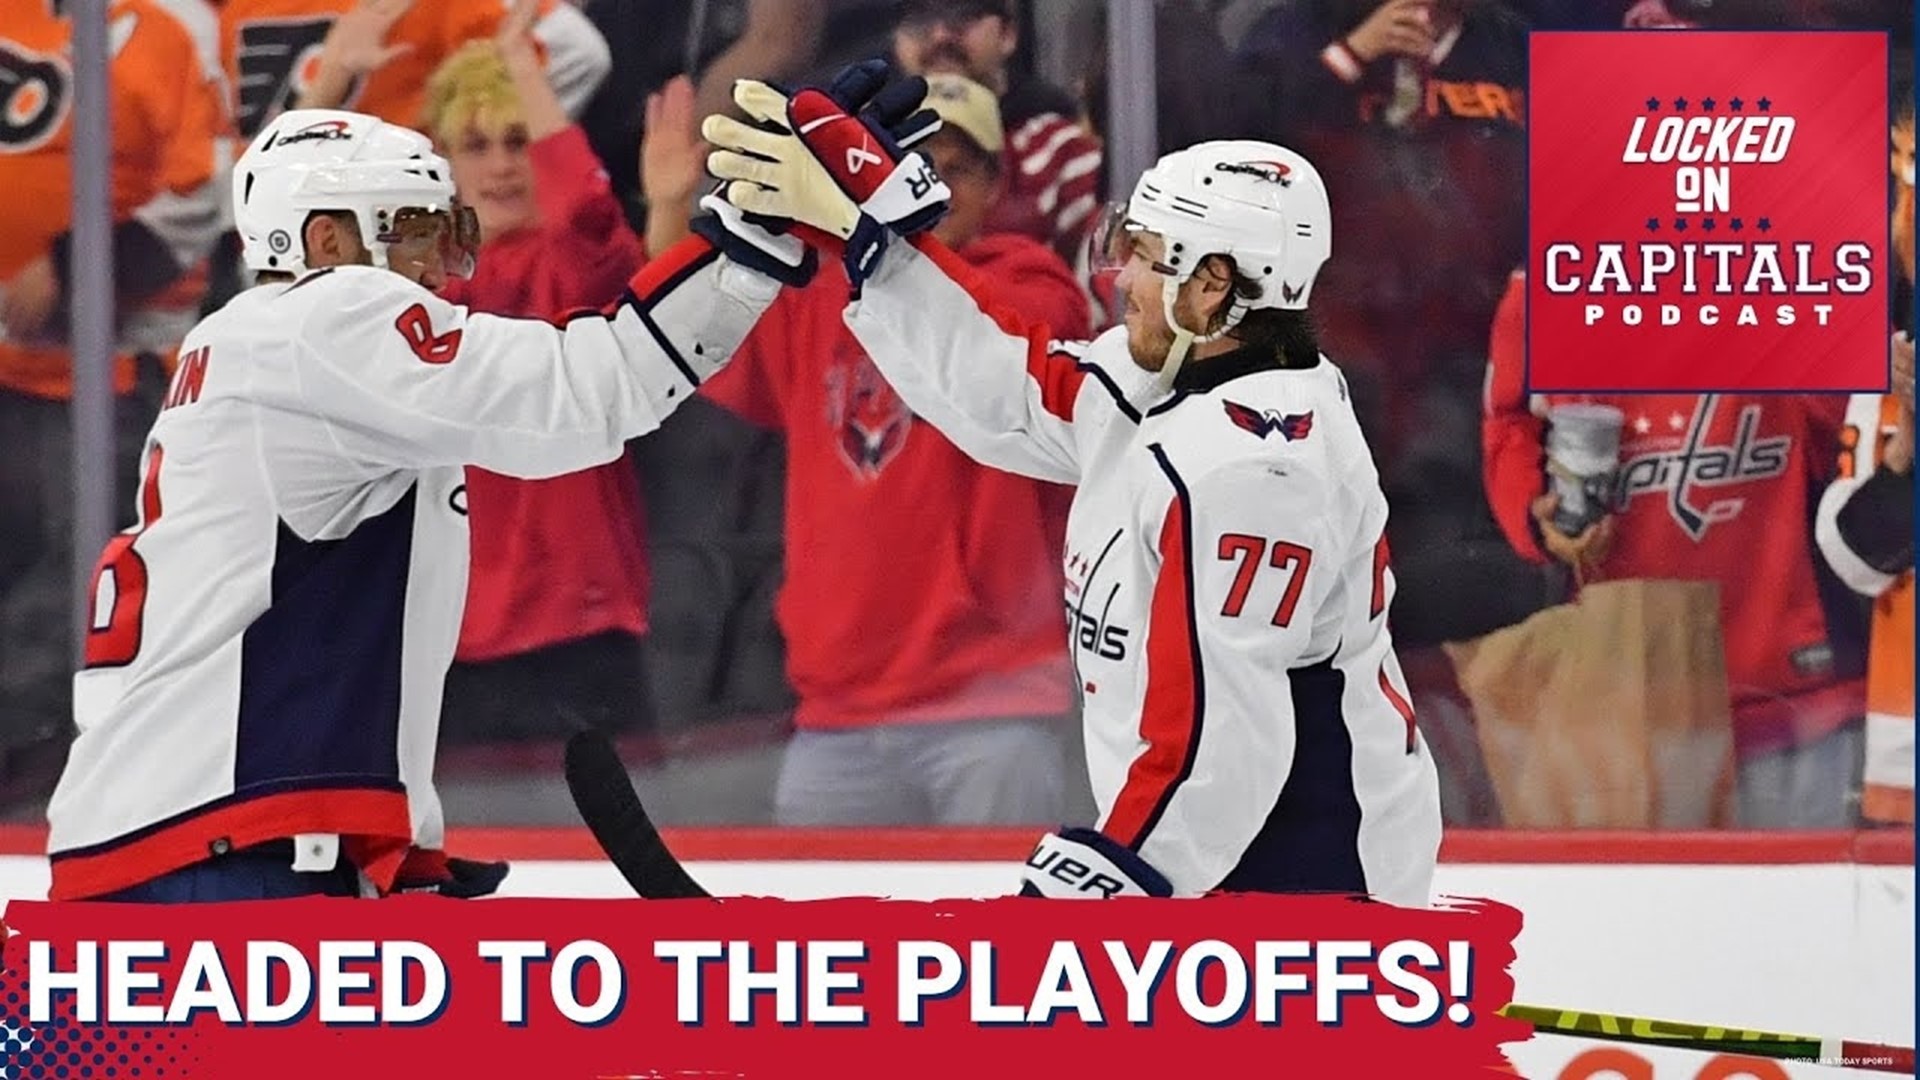 In this edition of Locked on Capitals... THE CAPITALS ARE HEADED TO THE PLAYOFFS. Pulling off the improbable and winning games when they needed to.